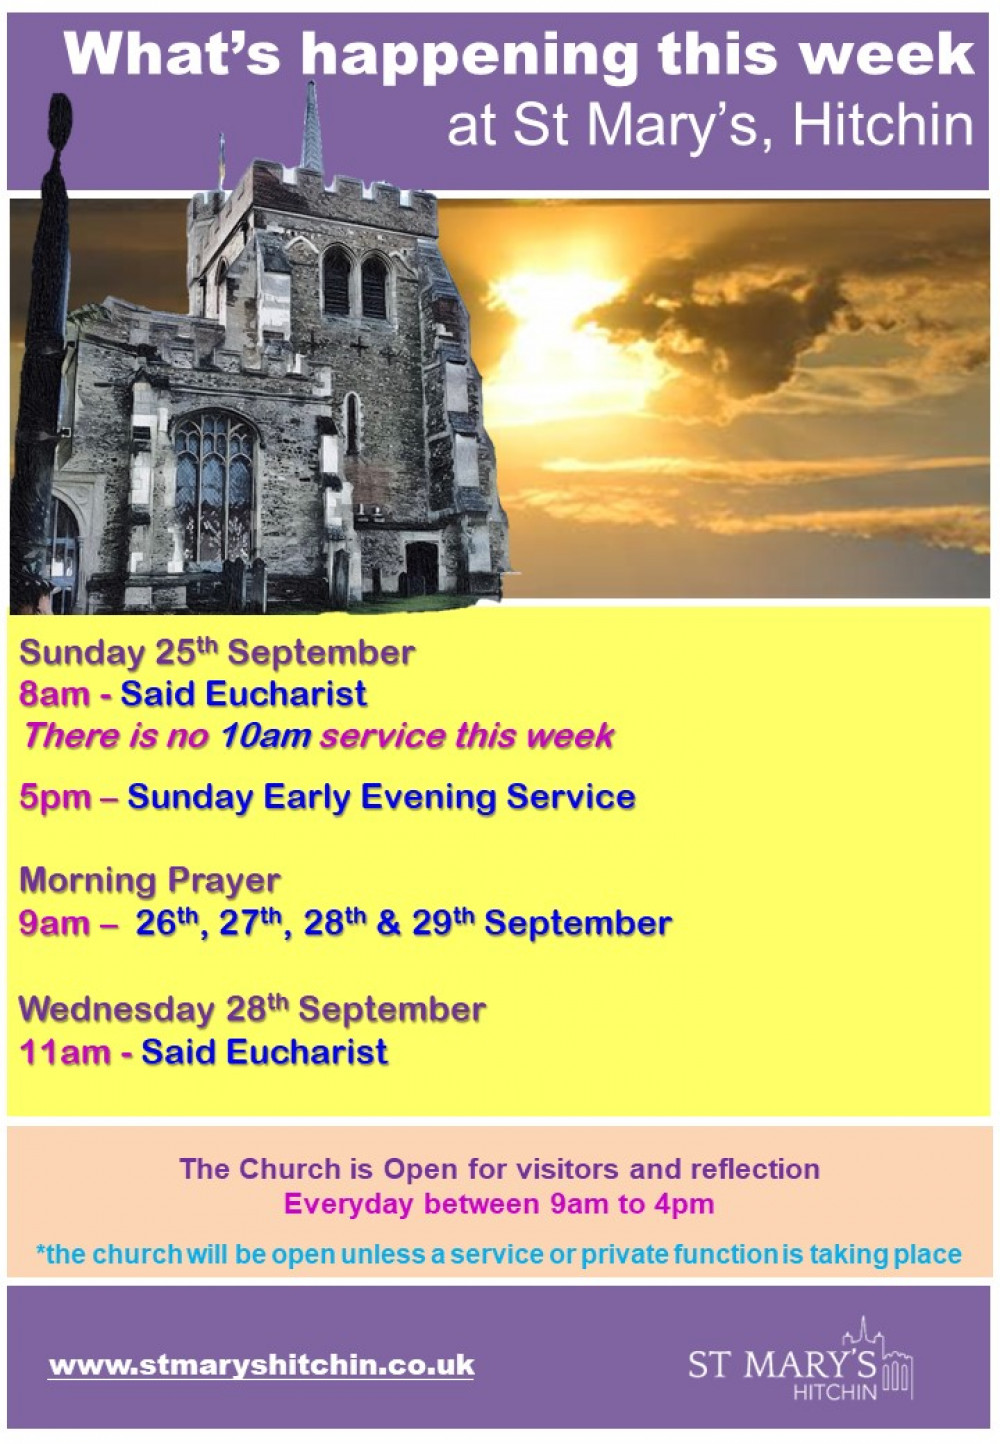 St Mary’s Church information 